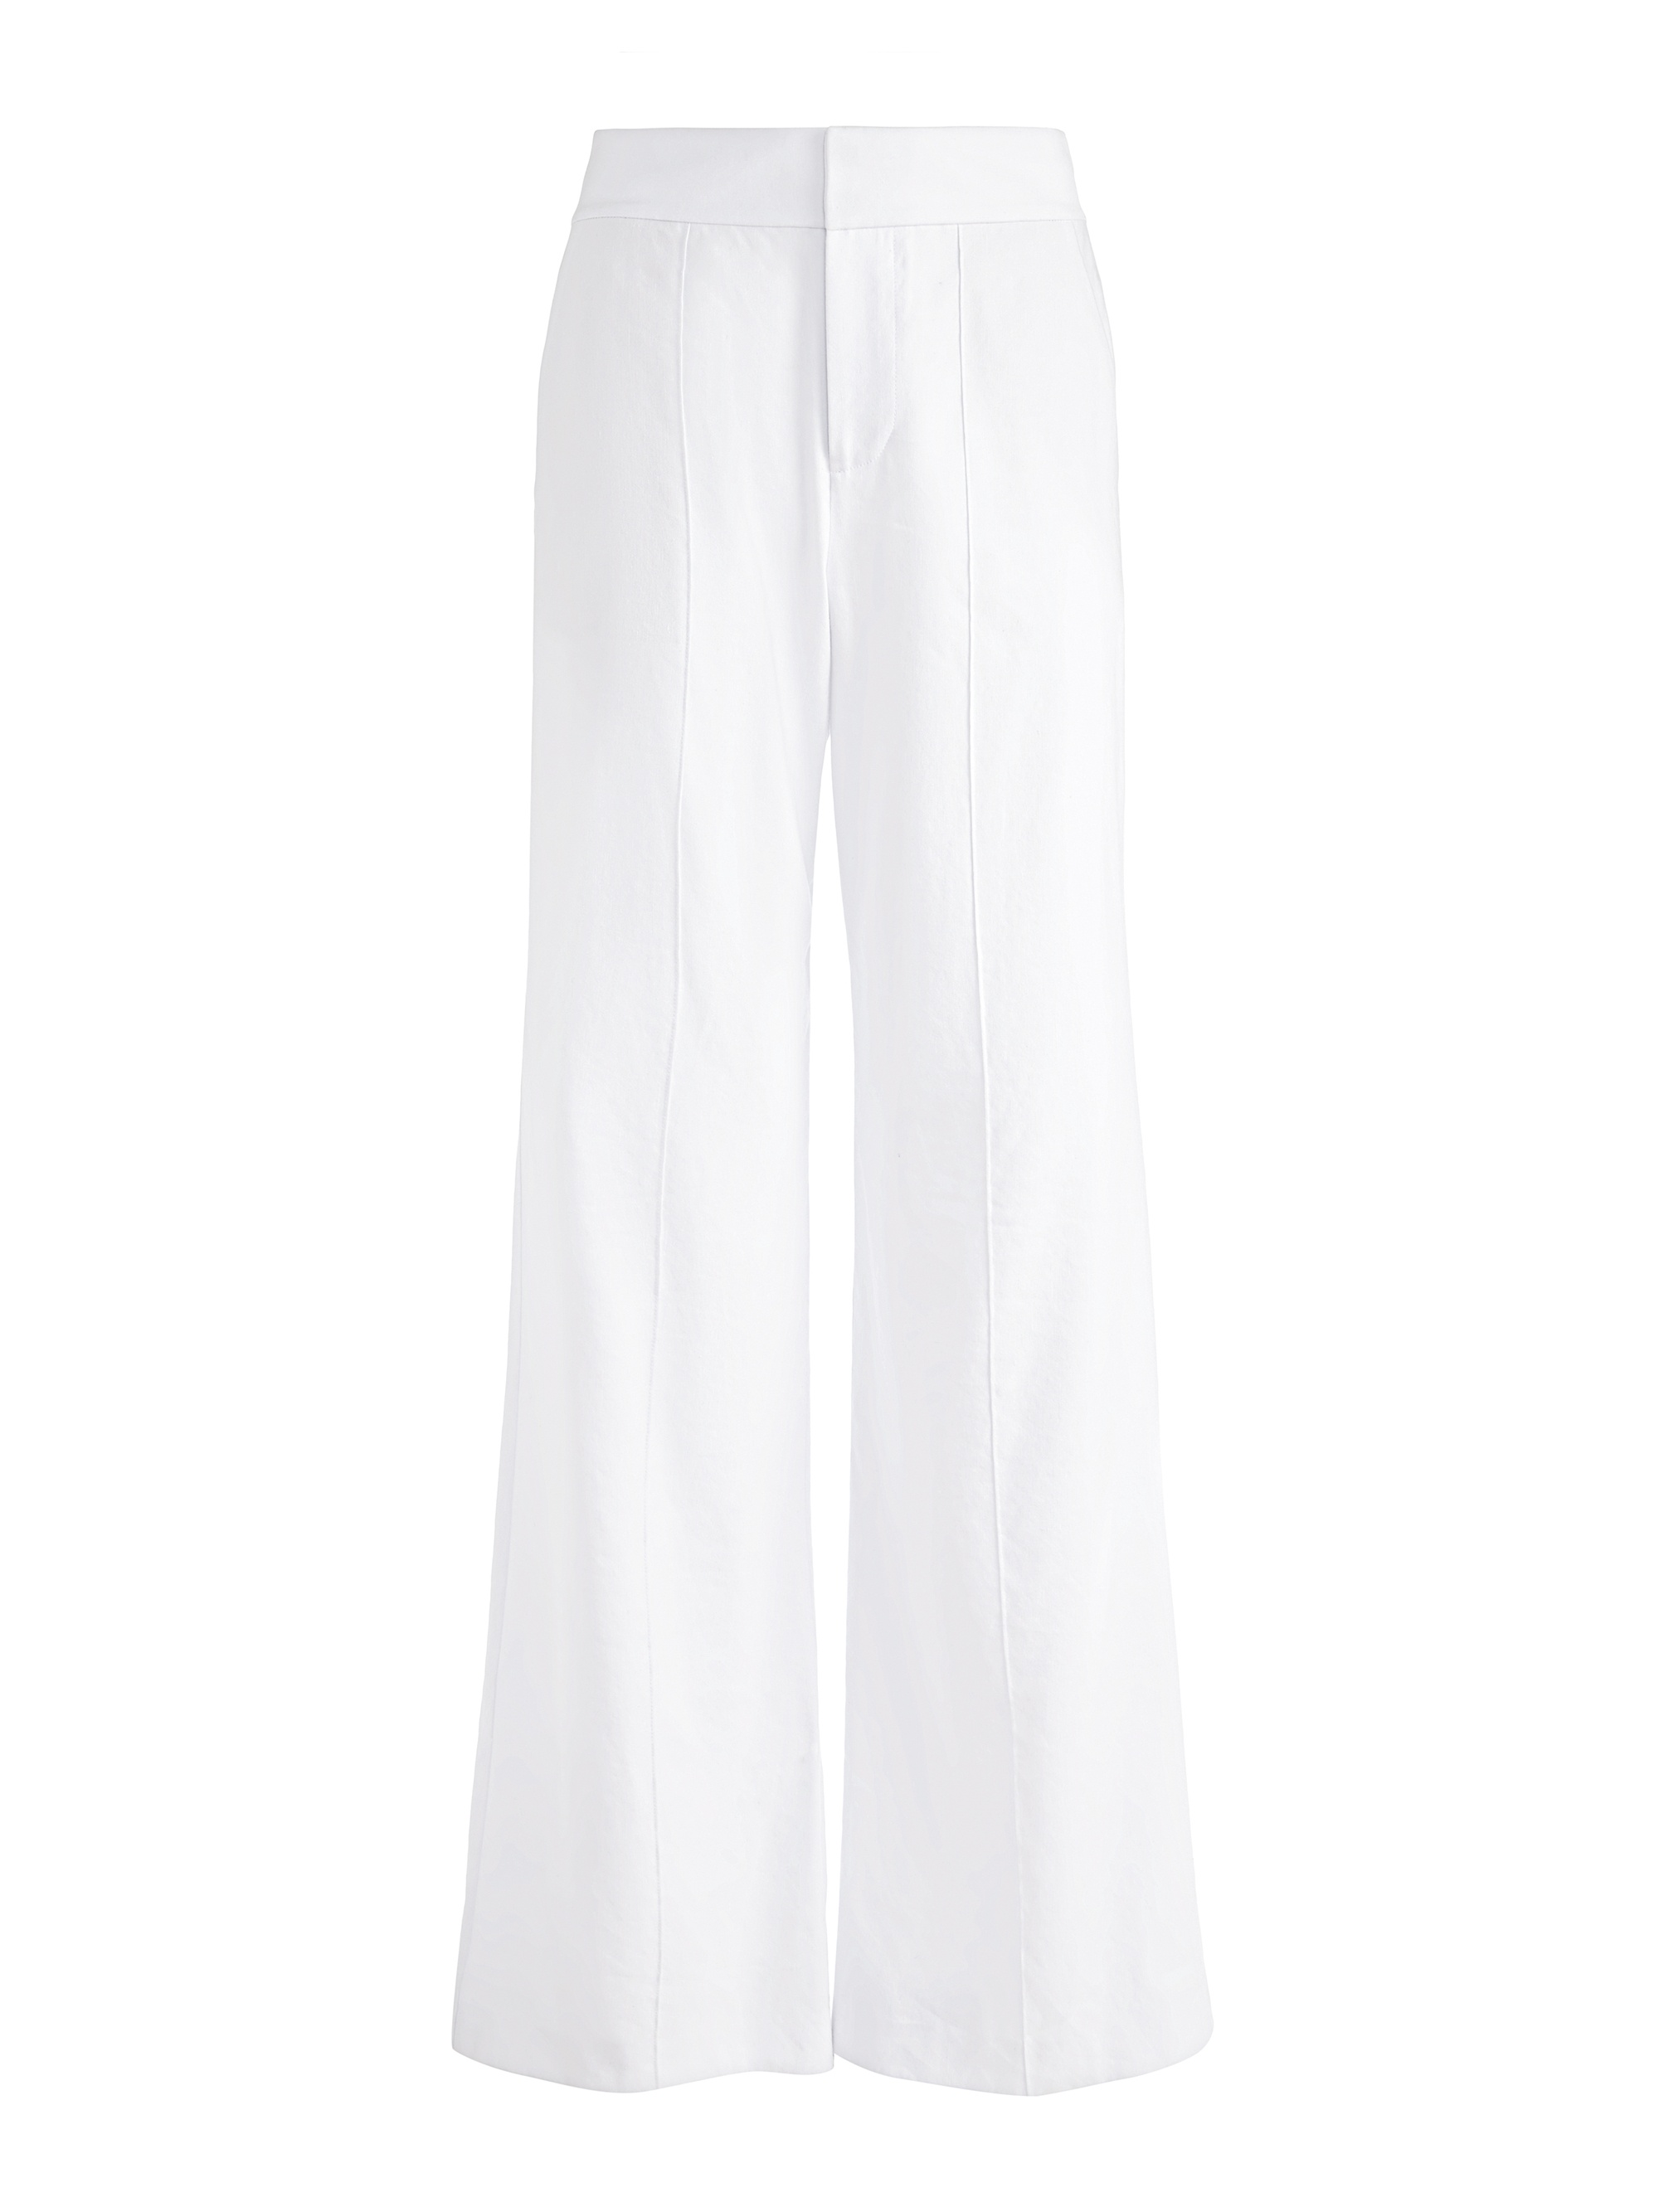 DYLAN HIGH WAISTED WIDE LEG PANT - 1